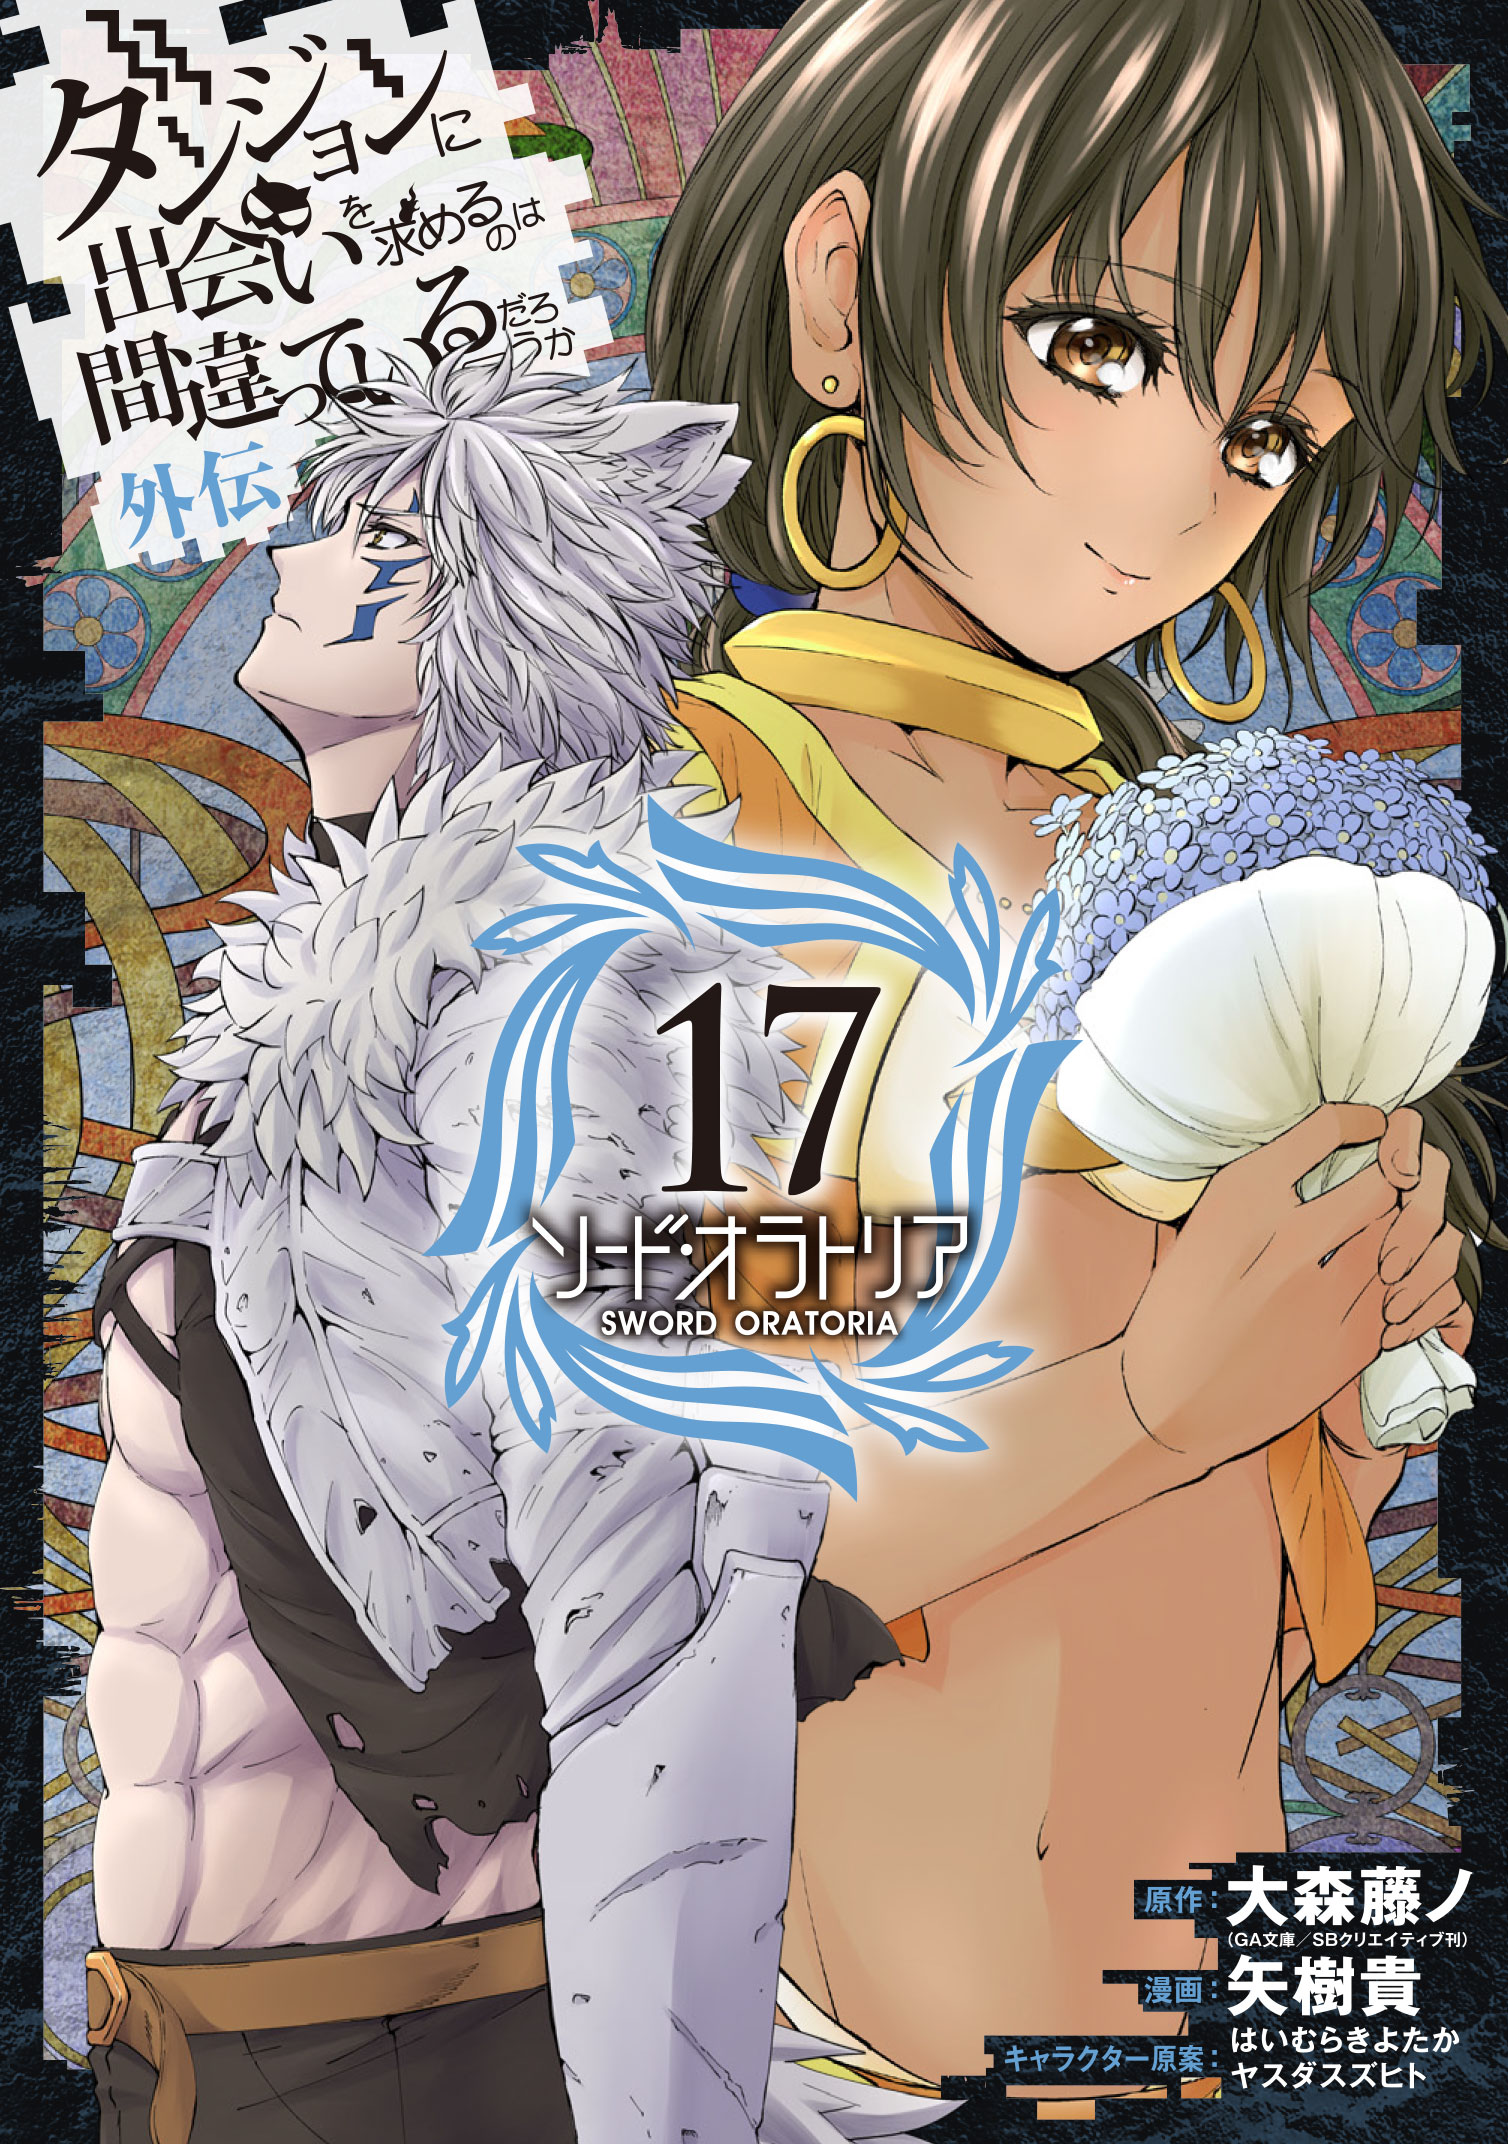 Our First Expedition! - DanMachi LN Volume 12 Review + Spoiler